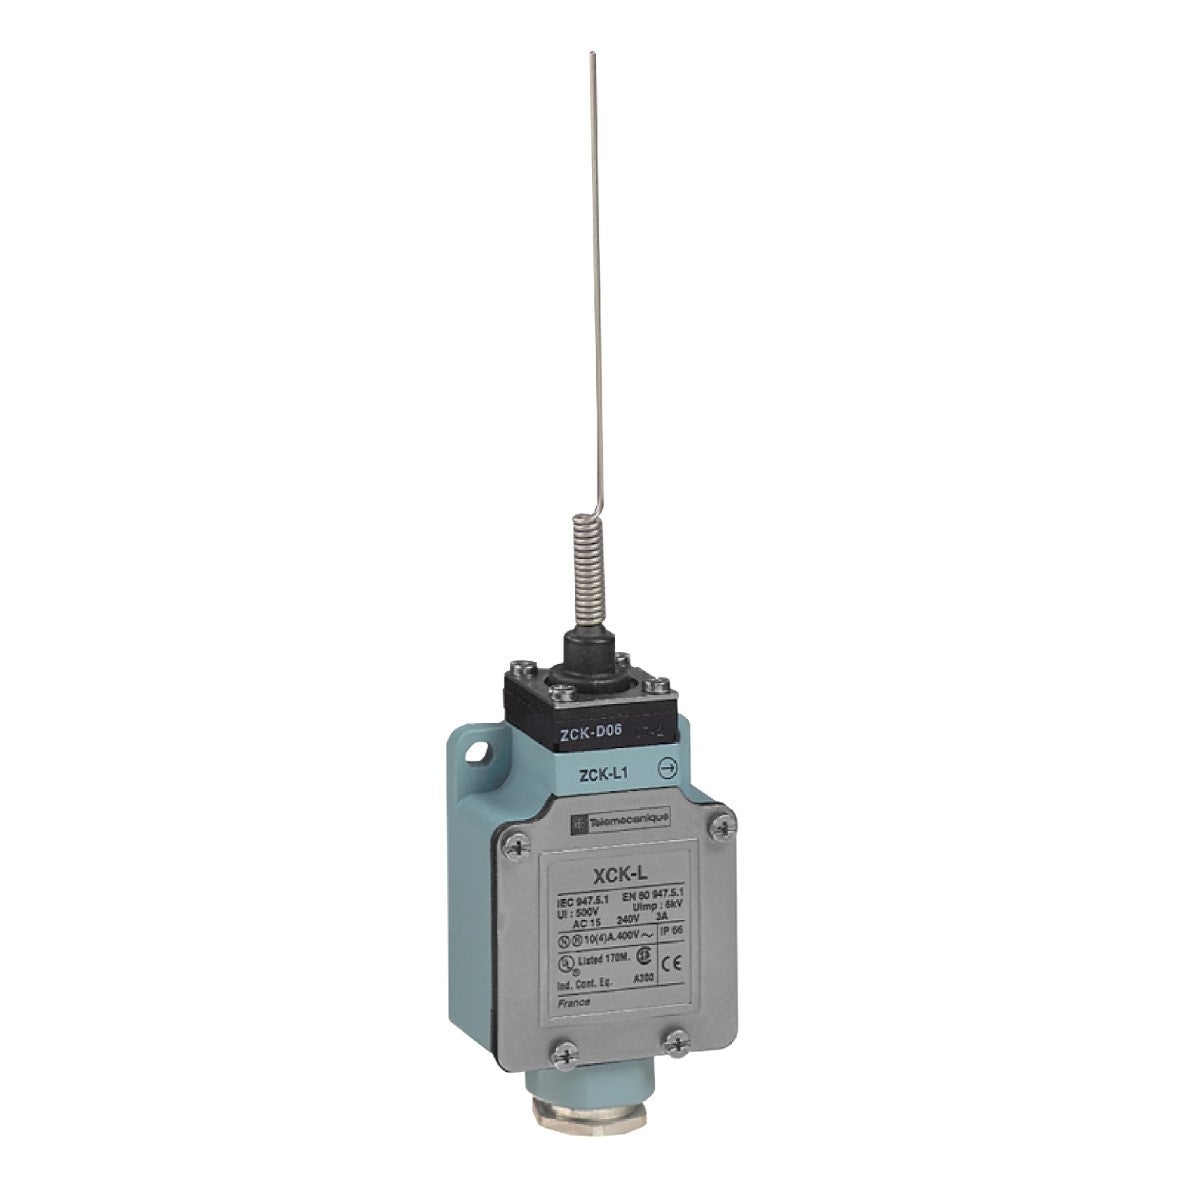 Limit switch, Limit switches XC Standard, XCKL, cats whisker, 1NC+1 NO, snap action, Cable gland